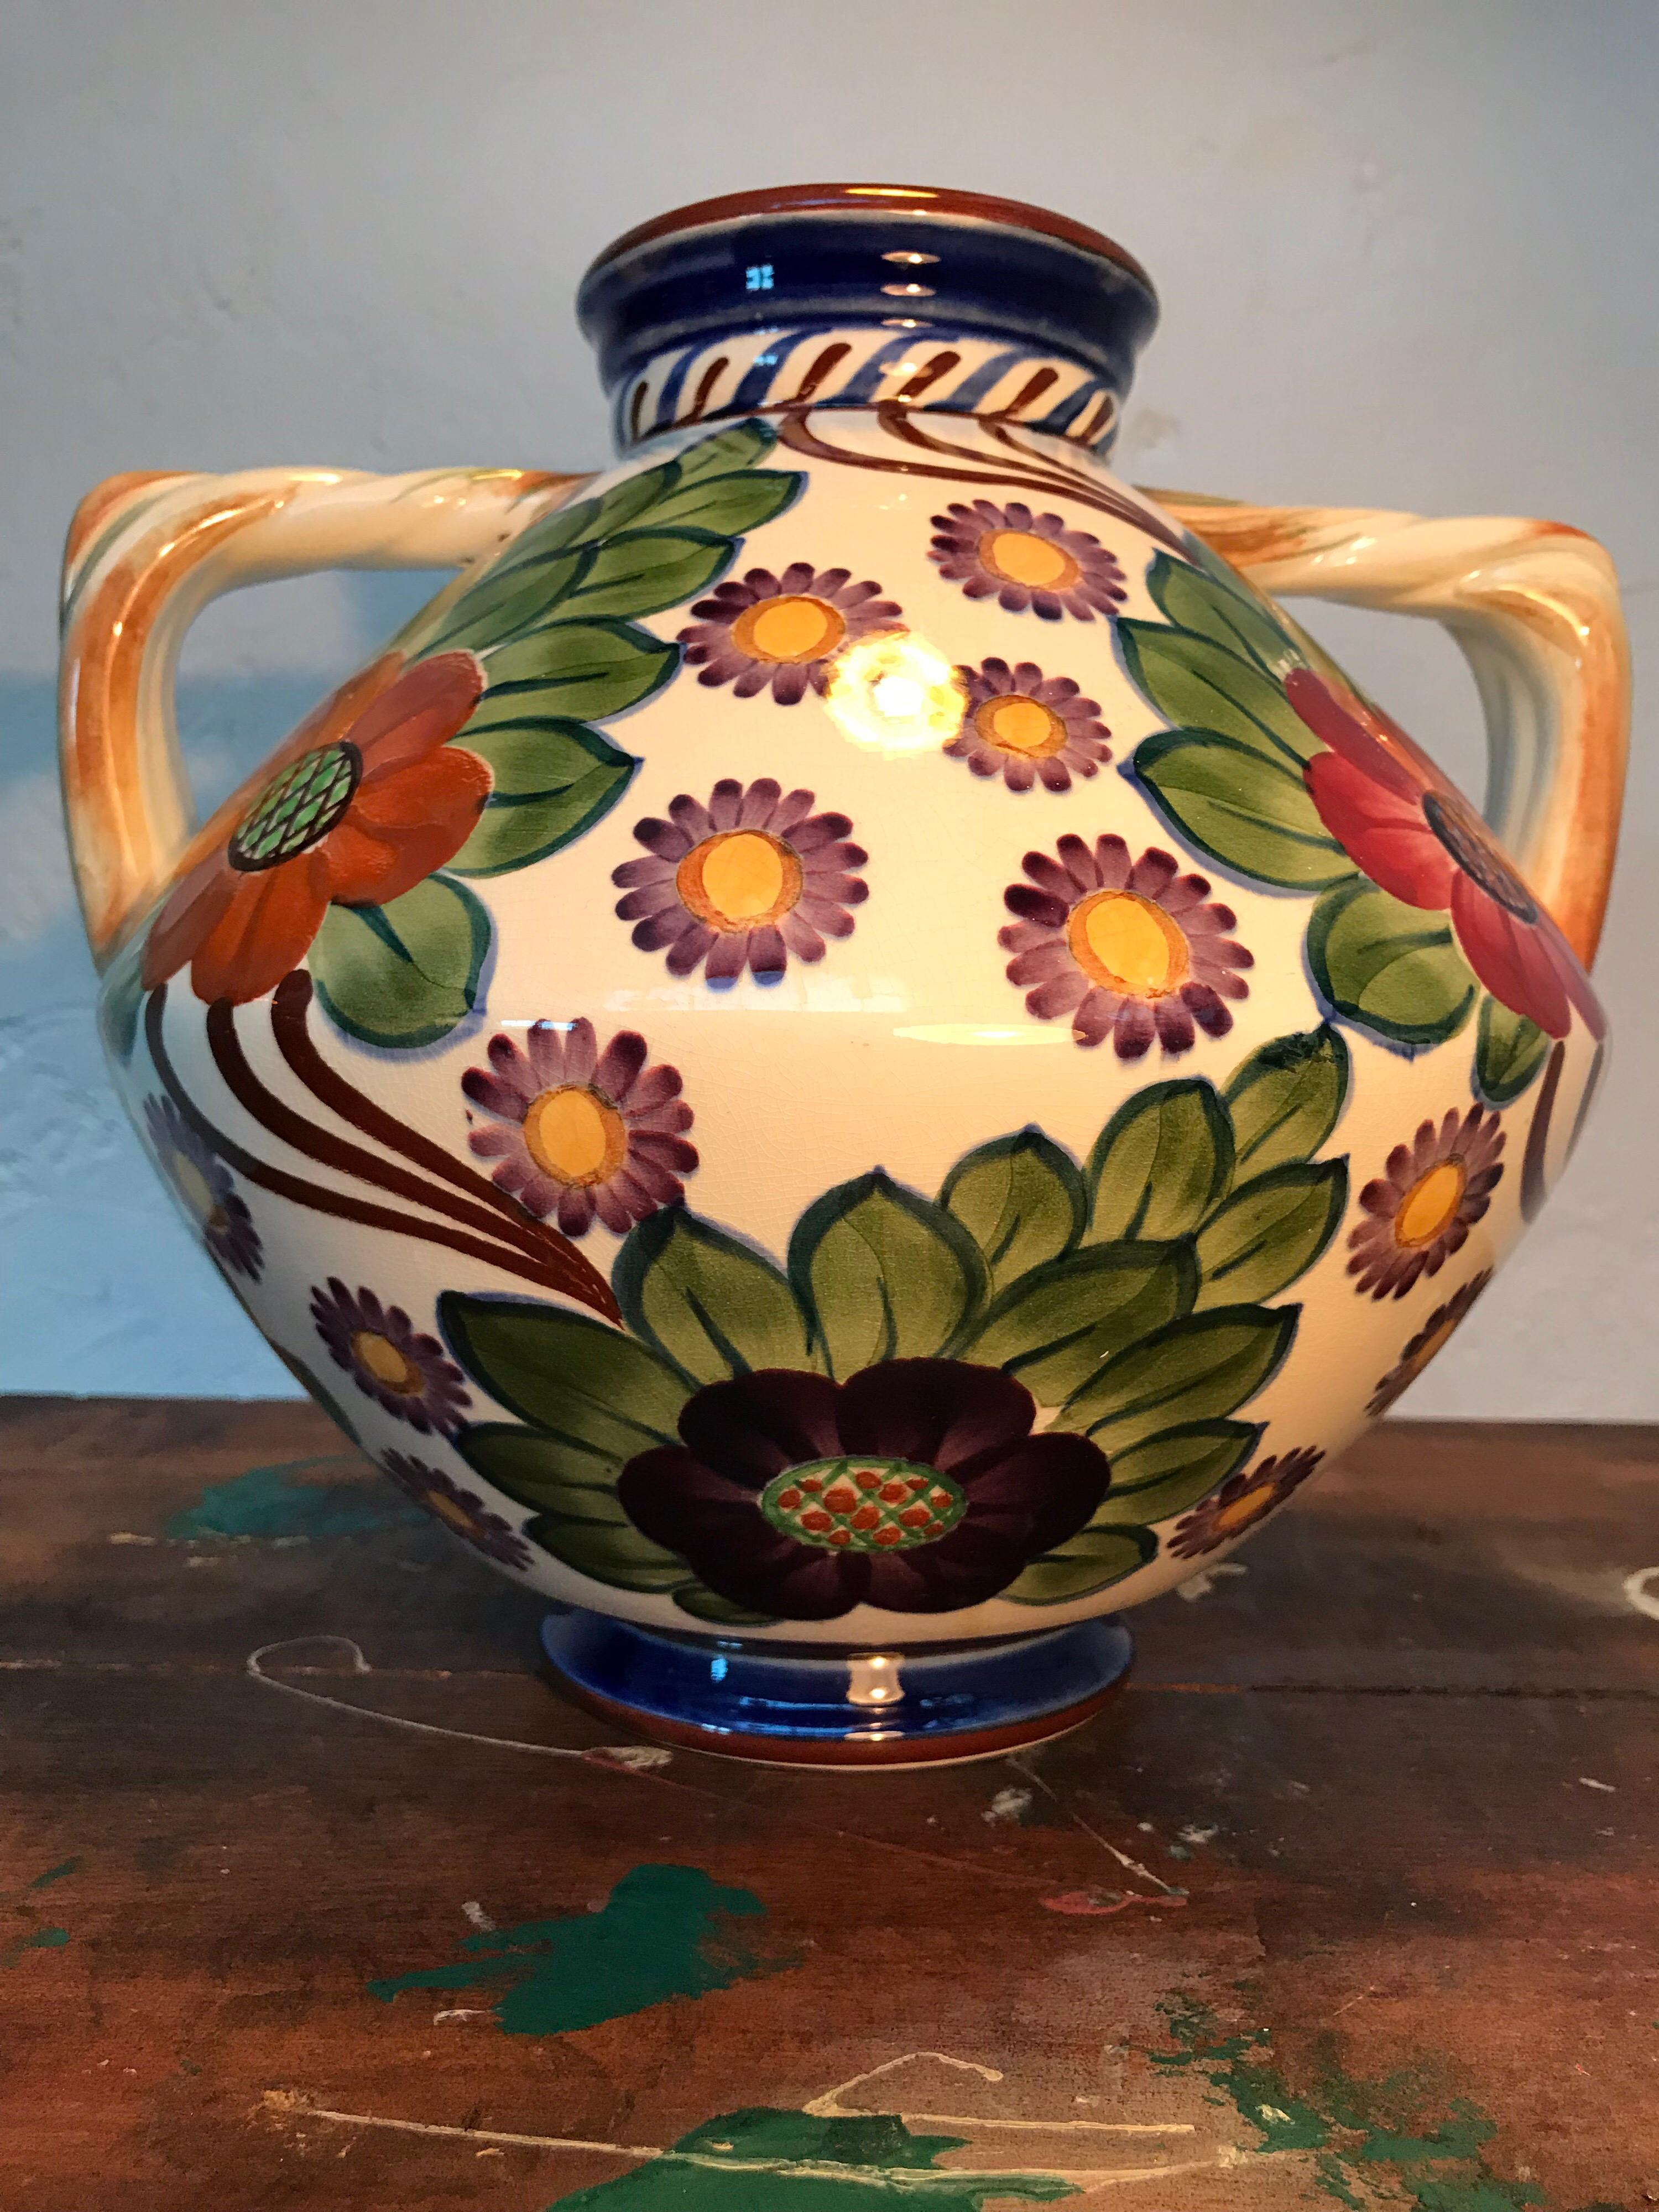 Antique vase by Royal Copenhagen Aluminia from 1908
Beautiful hand painted floral designs and colors.
No cracks or chips.